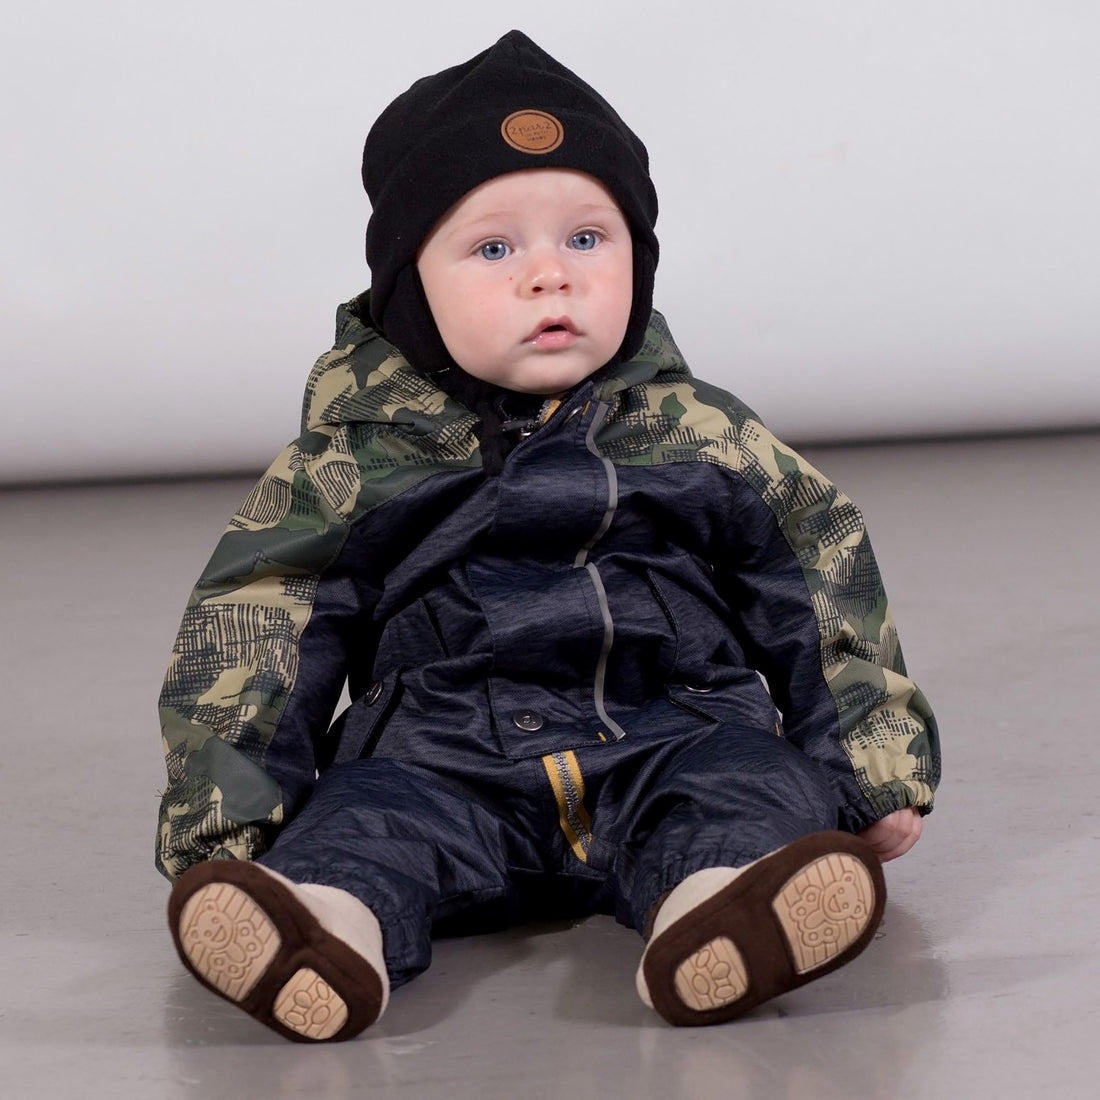 BABY BLACK SPRING SUIT WITH HAT, BABY BOY